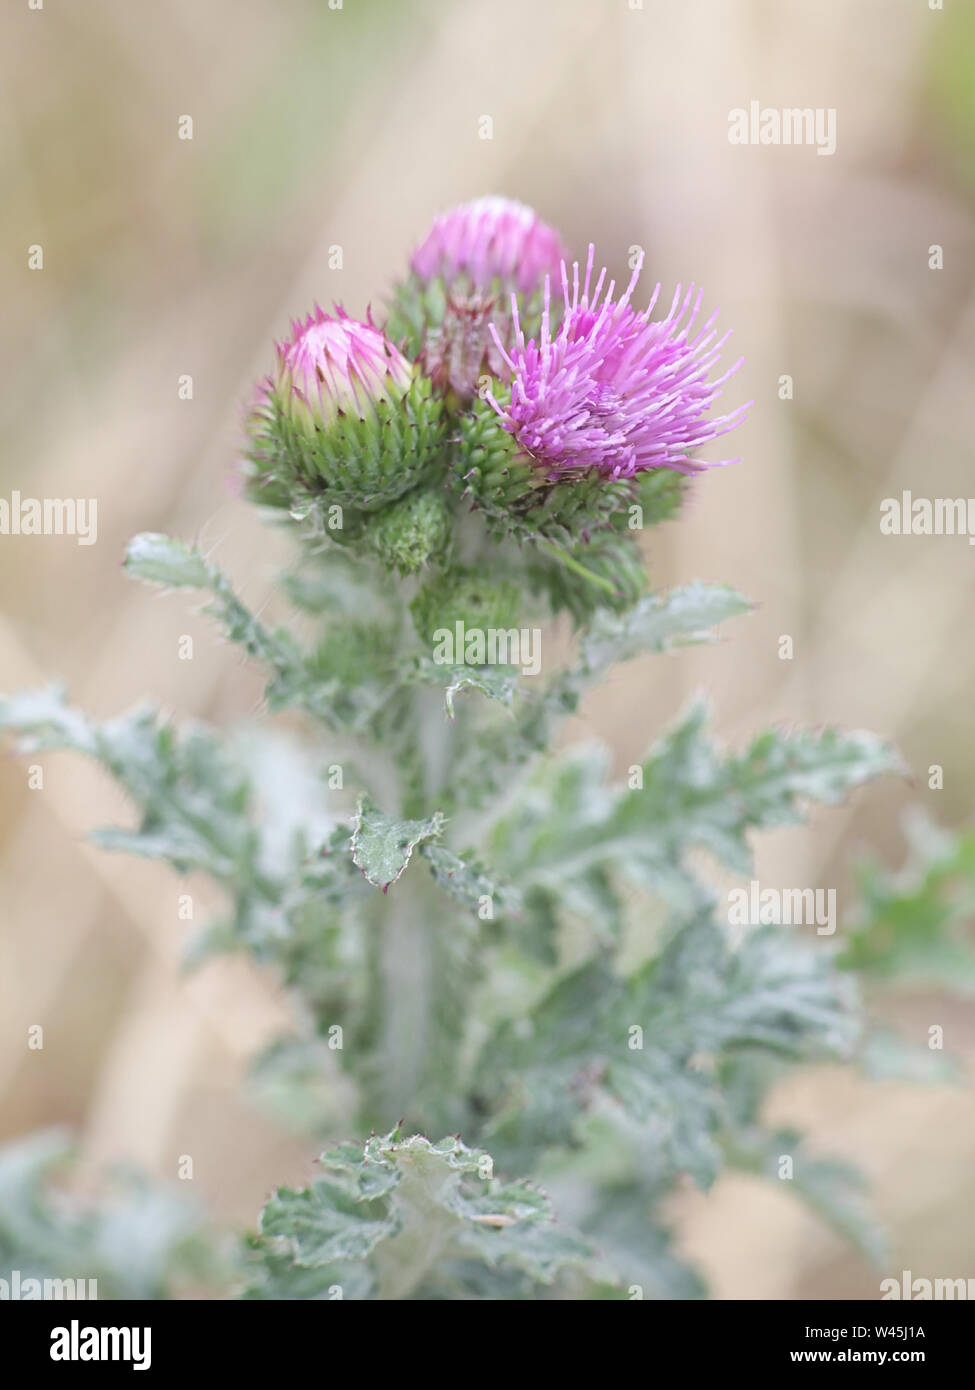 Carduus crispus, the curly plumeless thistle or welted thistle, wild plant from Finland Stock Photo